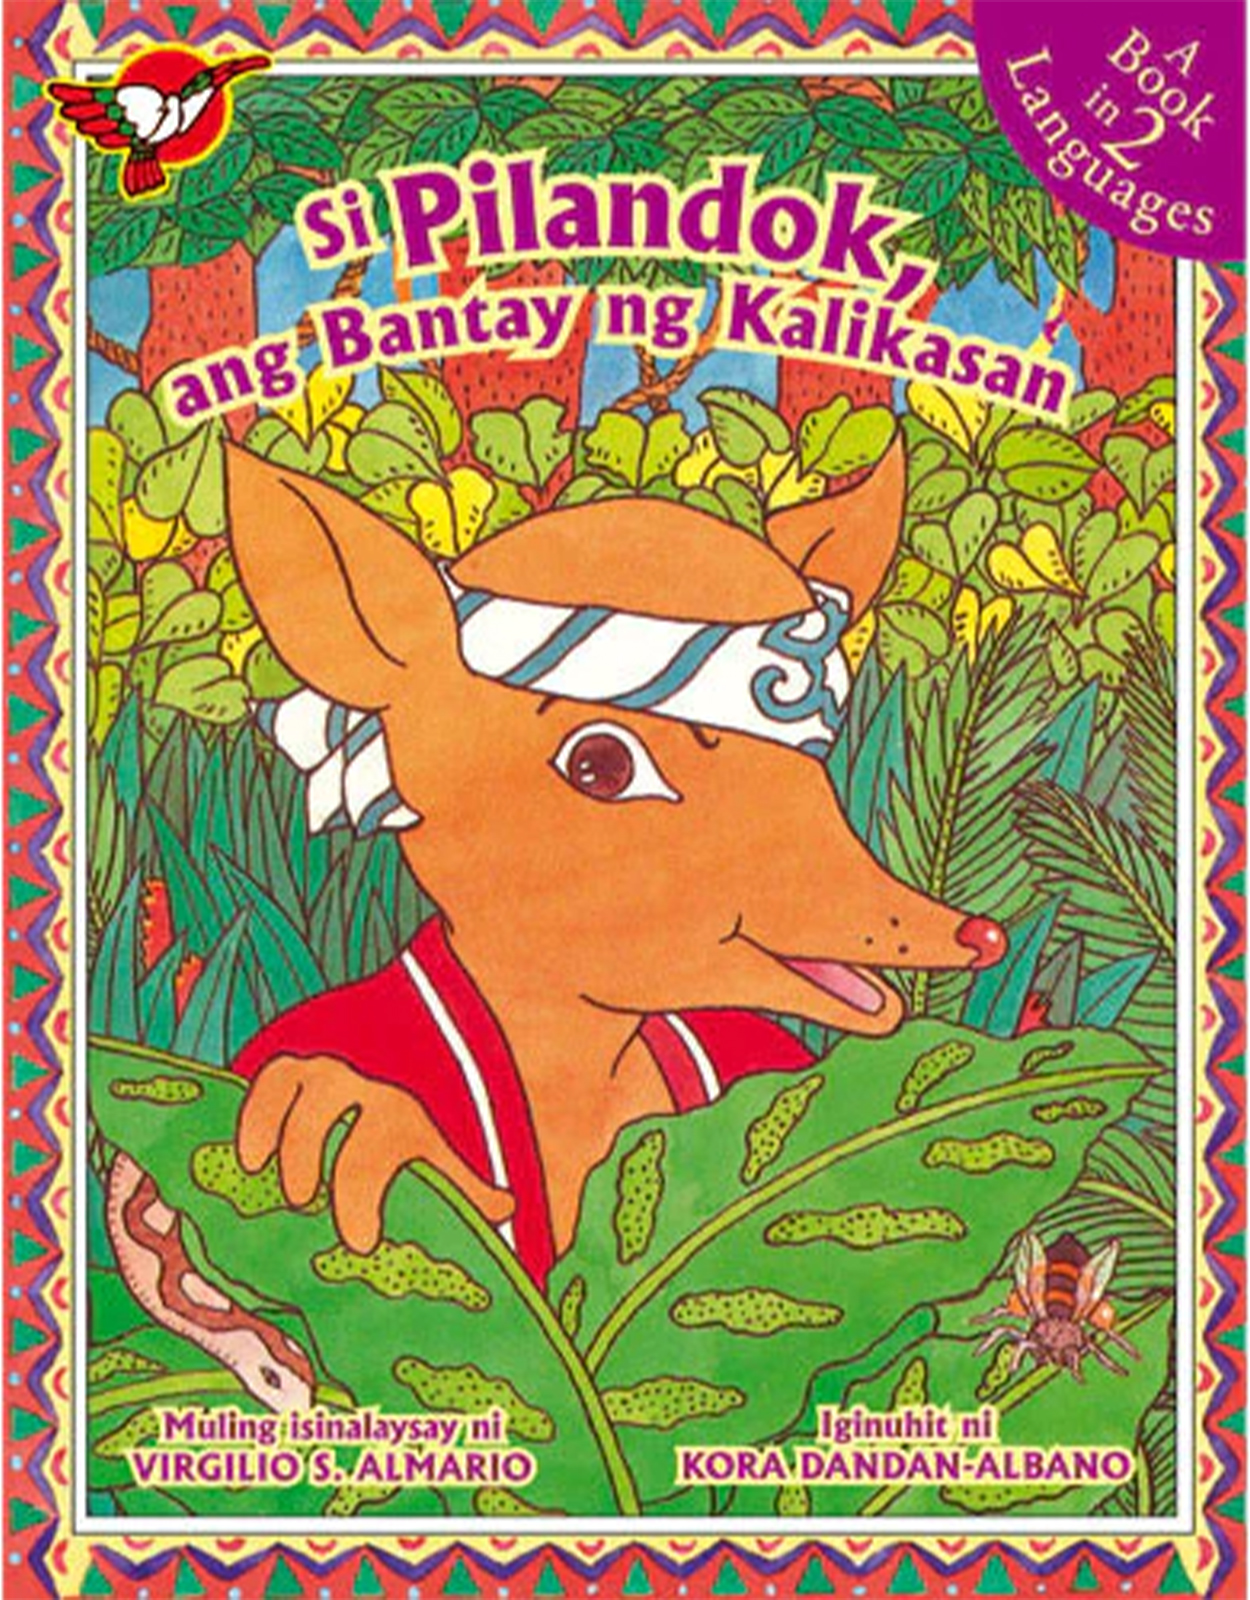 Tagalog Stories for Kids: The Tales of Pilandok